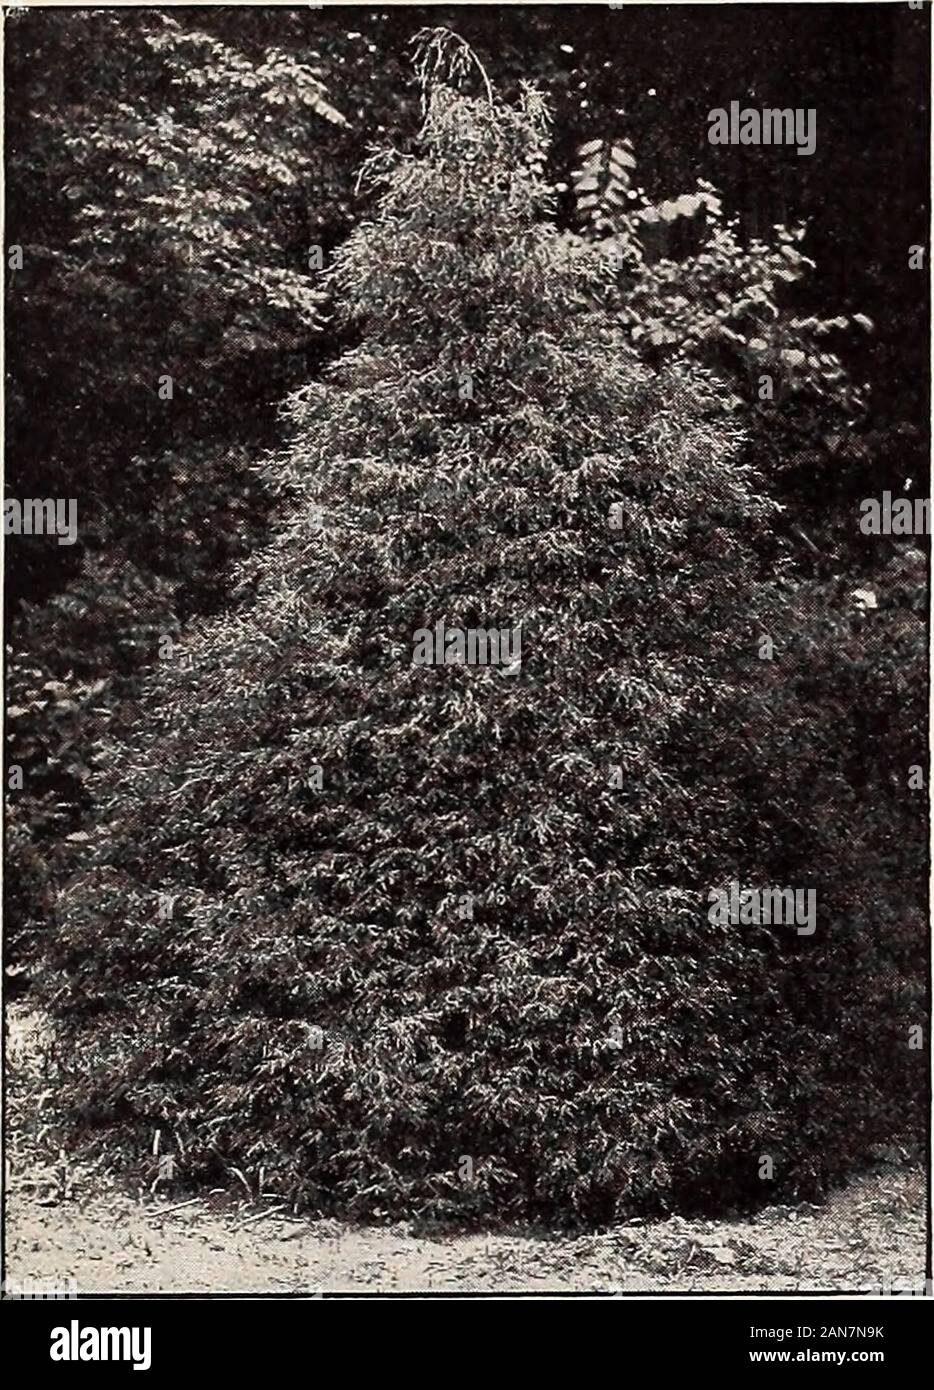 P.JBerckmans Co . Spruce). A popular species,extensively cultivated in the northern sections, butsucceeding only to a moderate extent in the South.Well adapted to the mountain districts. each 10 3 to zVi ft $1 00 $8 00 18 to 24 in 50 4 00 PinUS. Pine Pinus excelsa (Bhotan Pine). Resembles the WhitePine, but with much longer and more glaucousleaves, and of a much more graceful habit. It isknown in India as Drooping Fir. each 12 to 15 in., well branched So 50 P. radiata (P. insi°nis, or P. Montereyensis:Monterey Pine). A desirable variety from CaliforniaTree attains a height of 80 to 100 feet. H Stock Photo